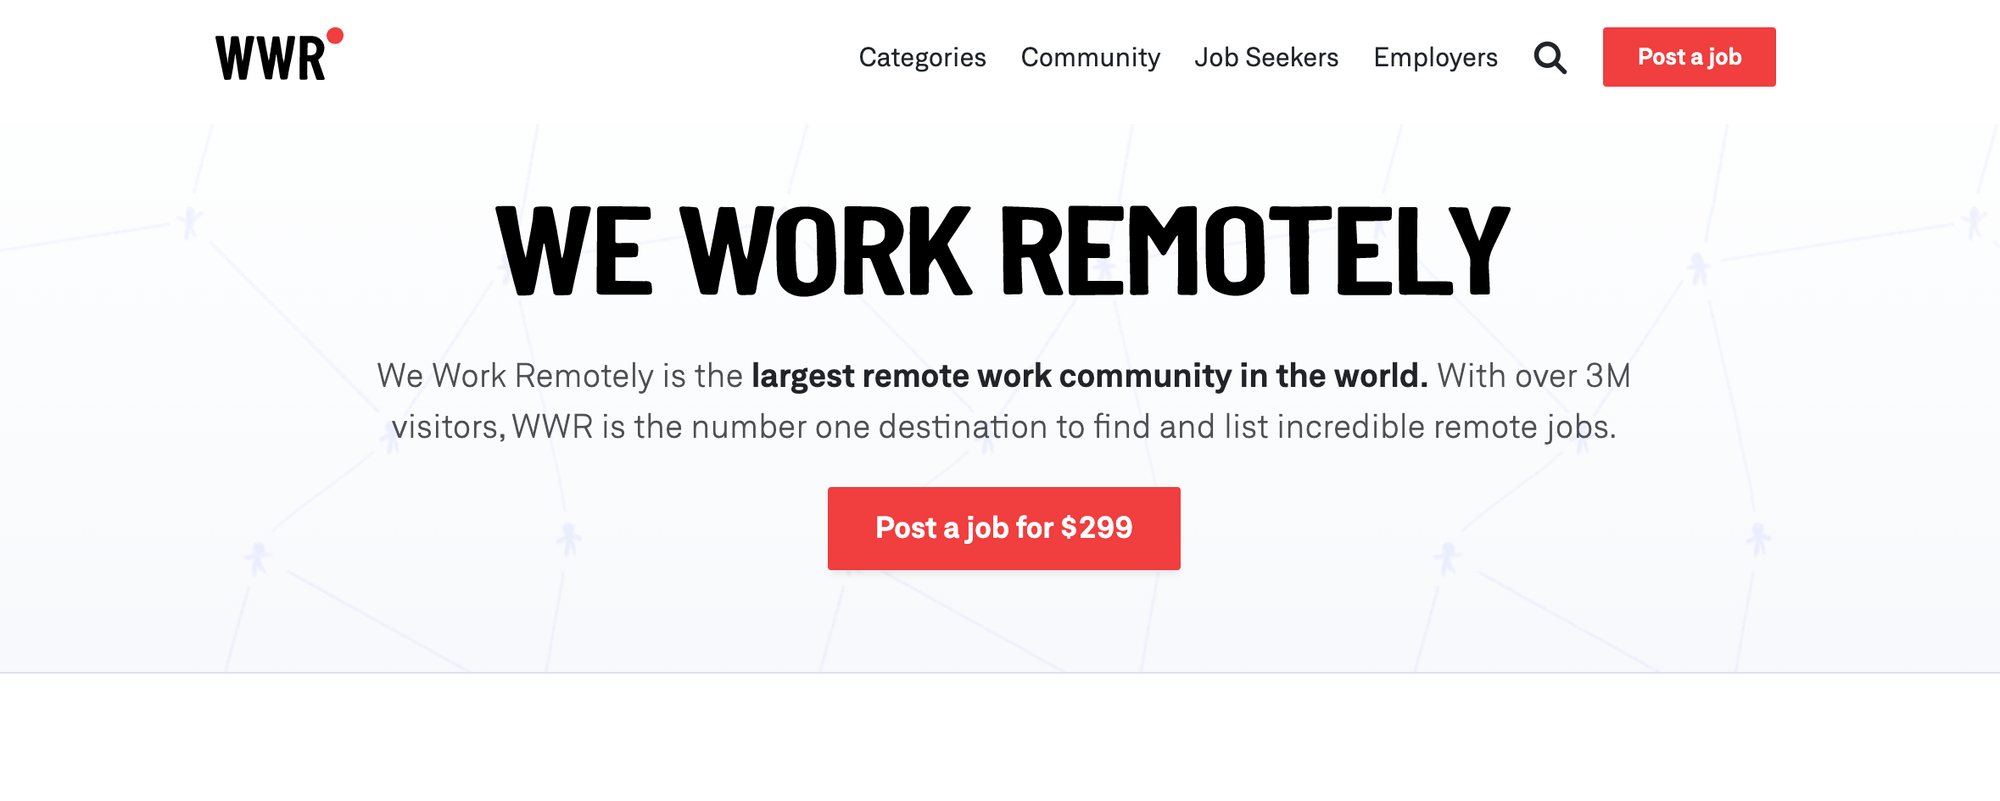 We work remotely, a great website to look for remote jobs